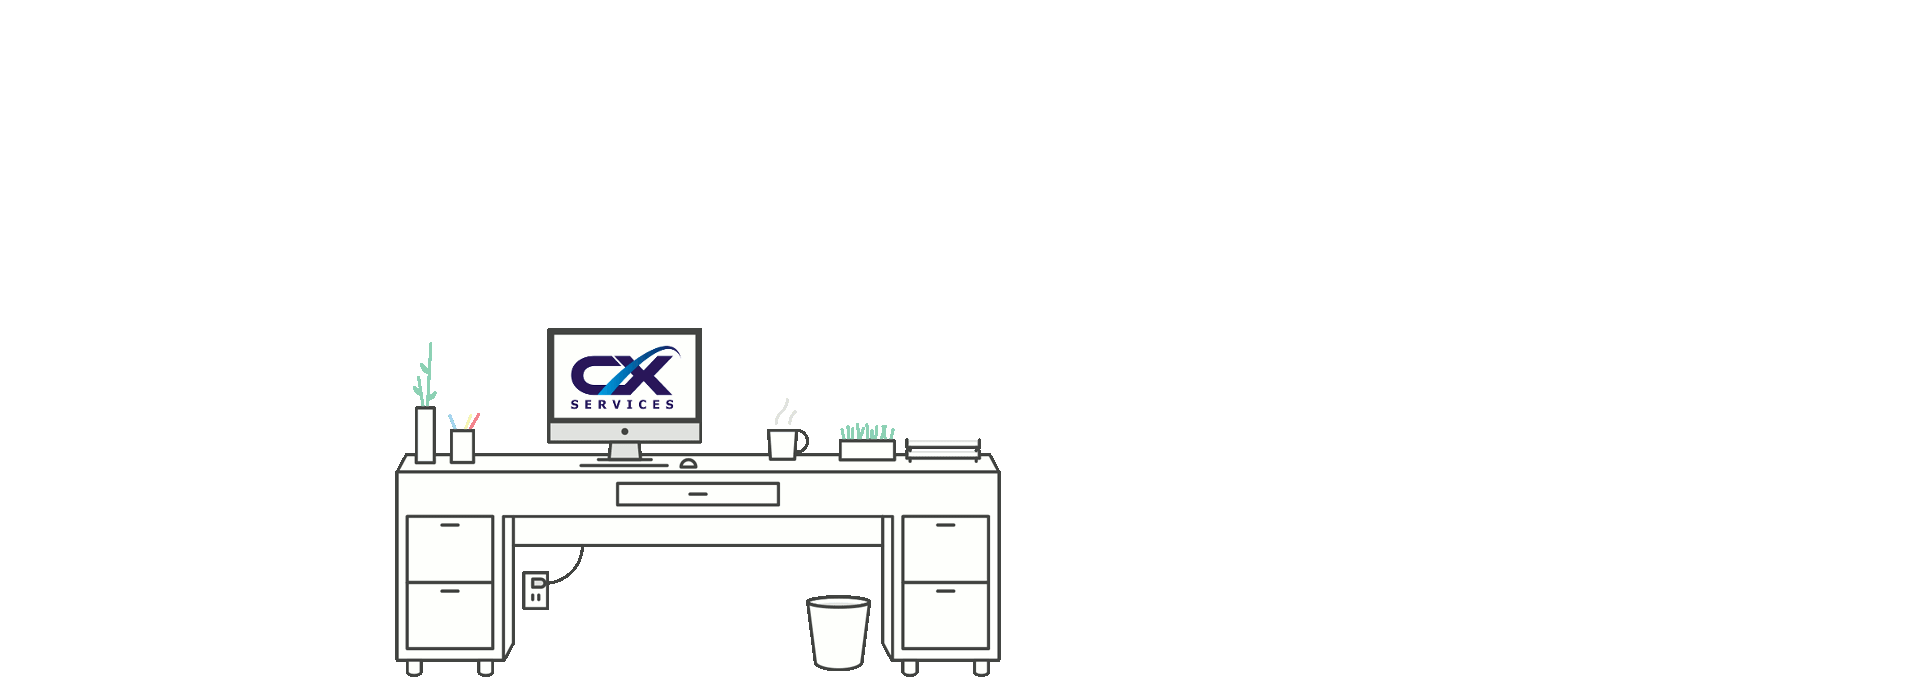 Office Desk With a Laptop on it Displaying The CX Services' Logo